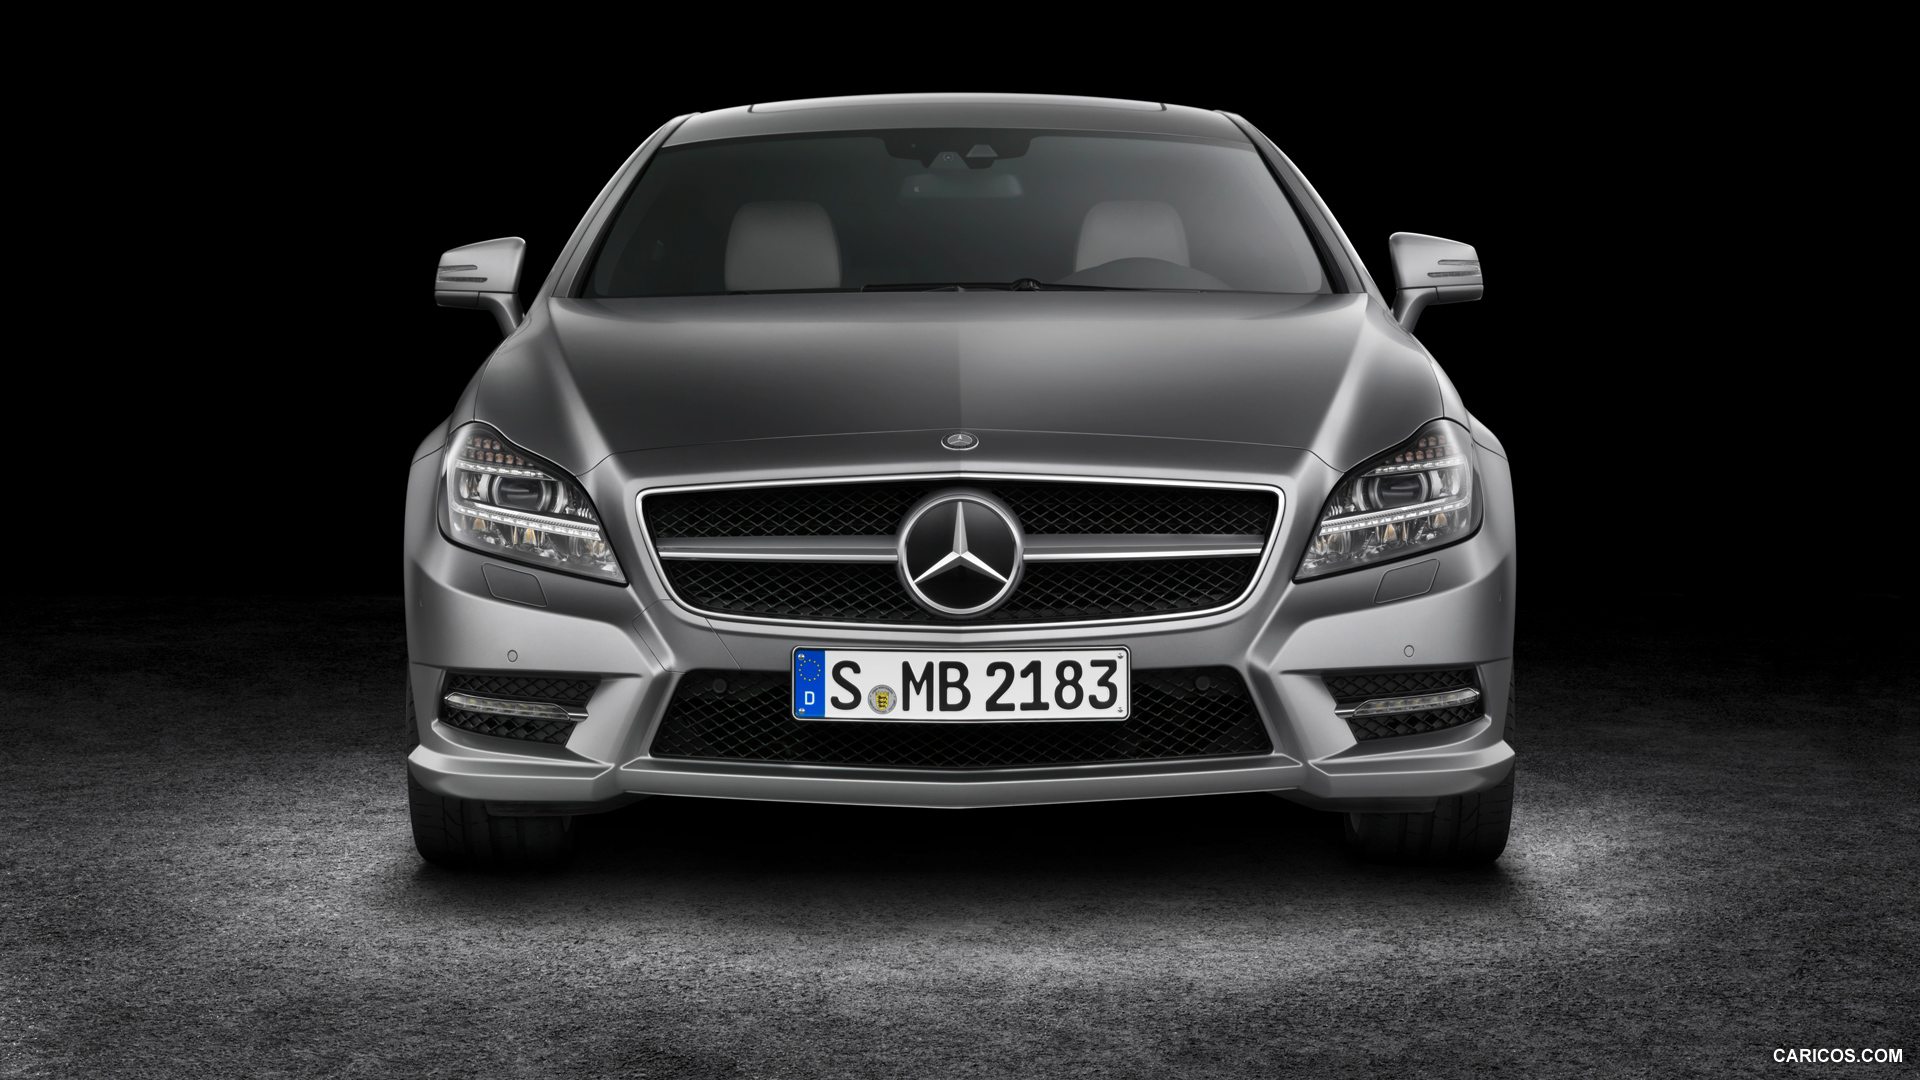 2013 Mercedes-Benz CLS 500 Shooting Brake - Front, #121 of 184